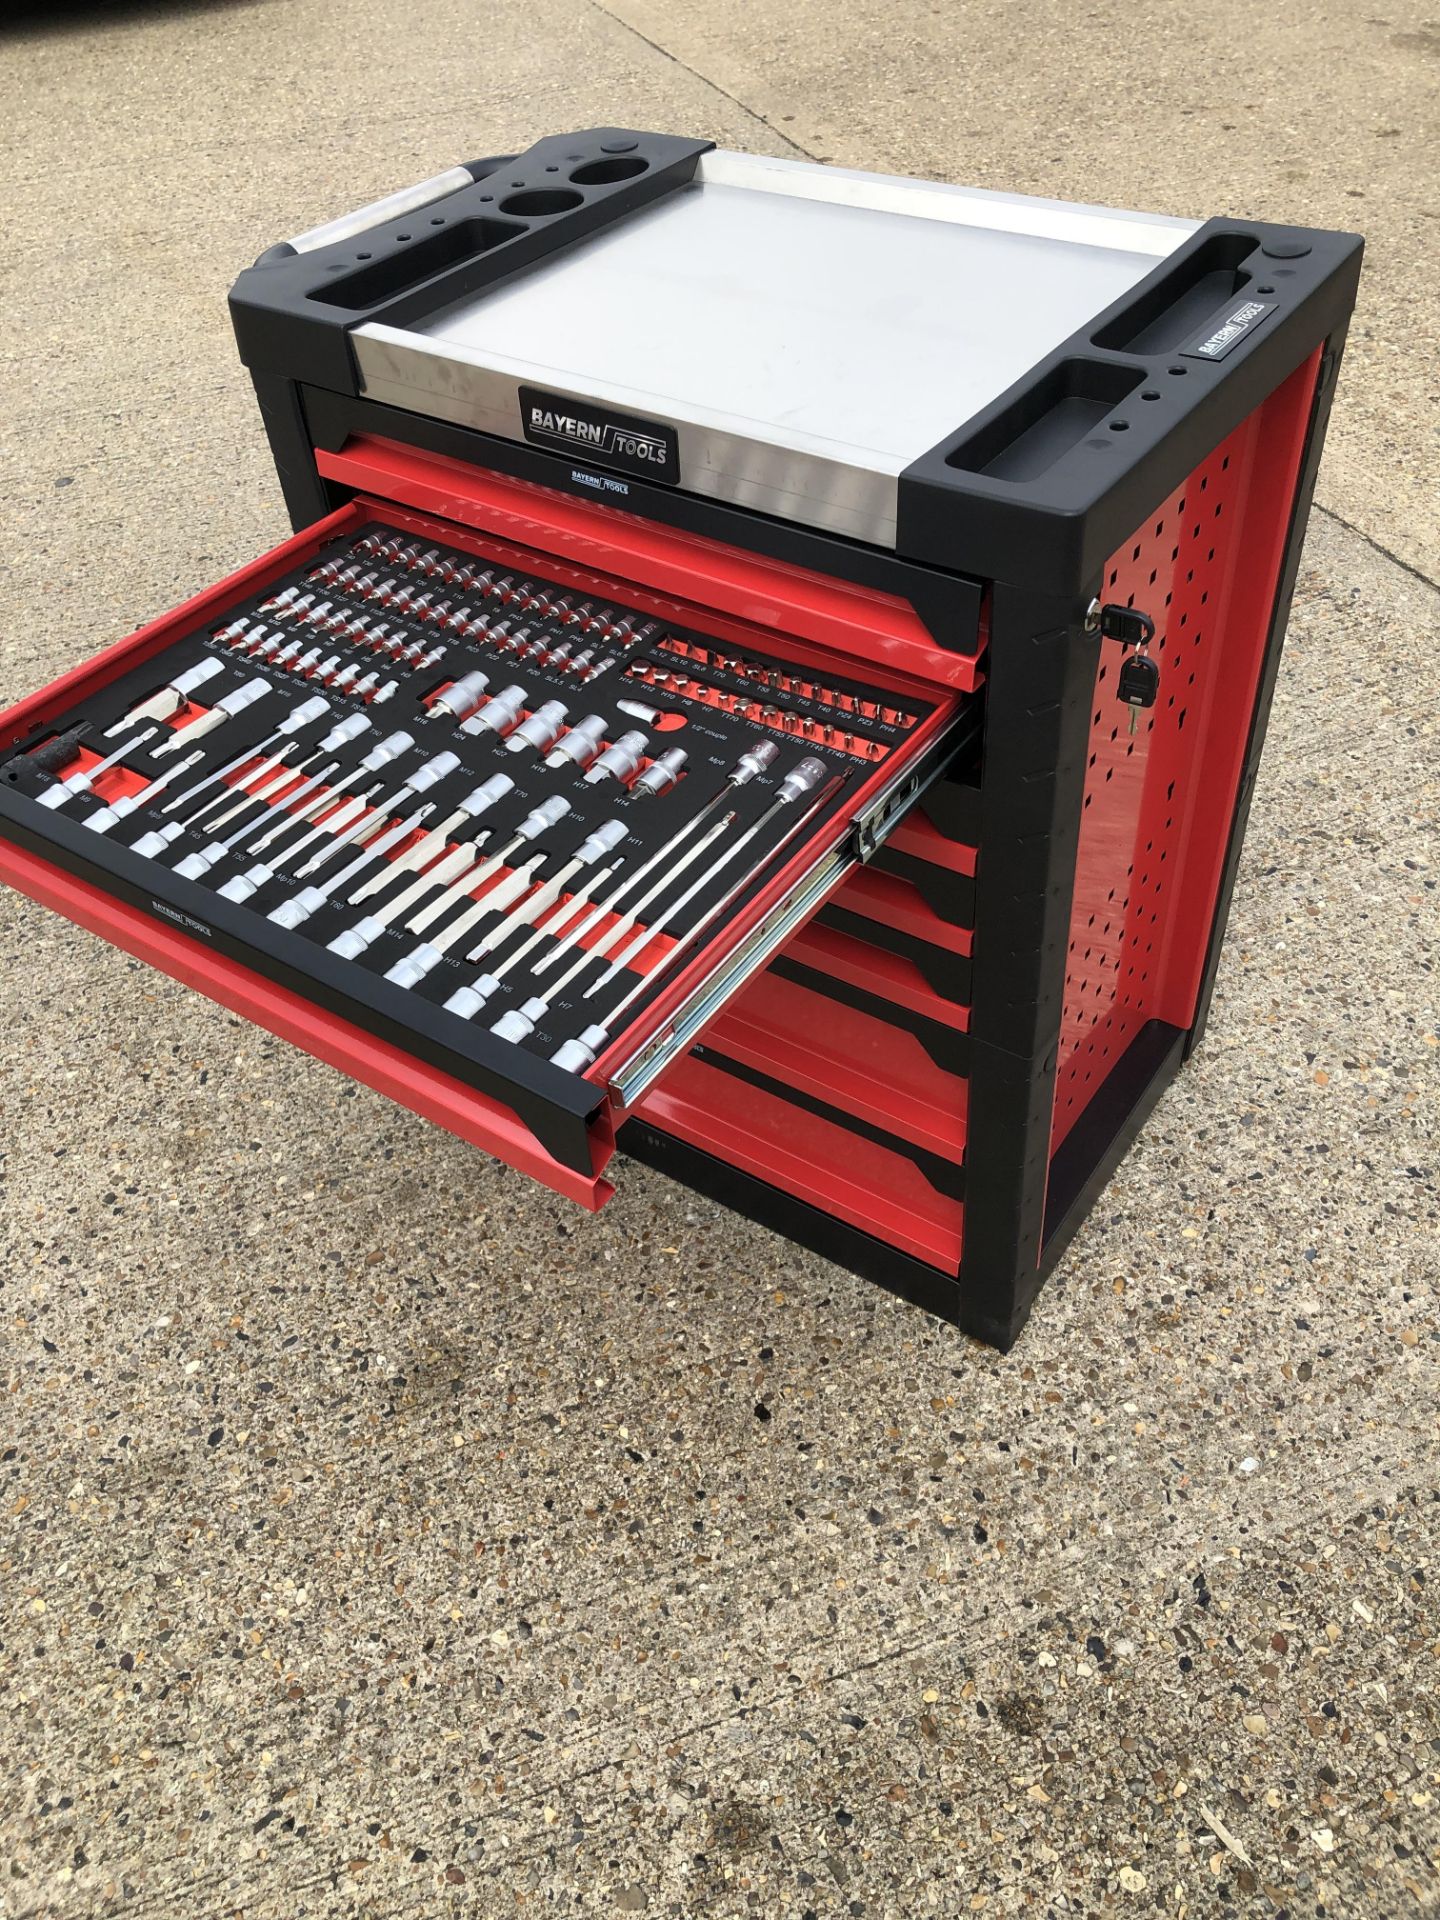 V Brand New Professional Locking Garage Tool Trolley/Cabinet (Red/Blue) with Metal Top and 7 Drawers - Image 7 of 12